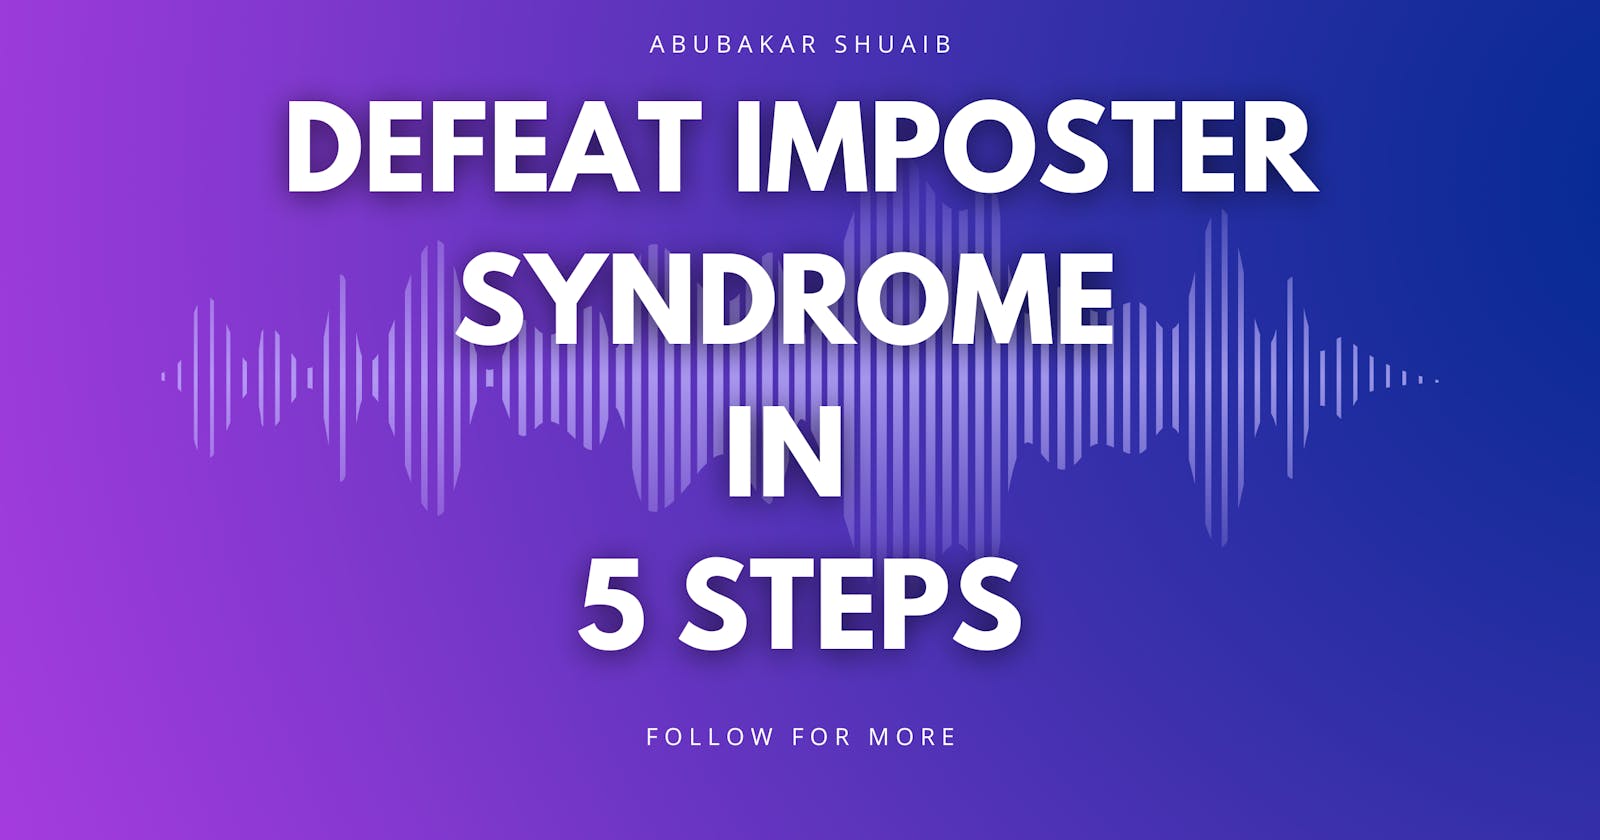 Defeat Imposter syndrome in 5 steps